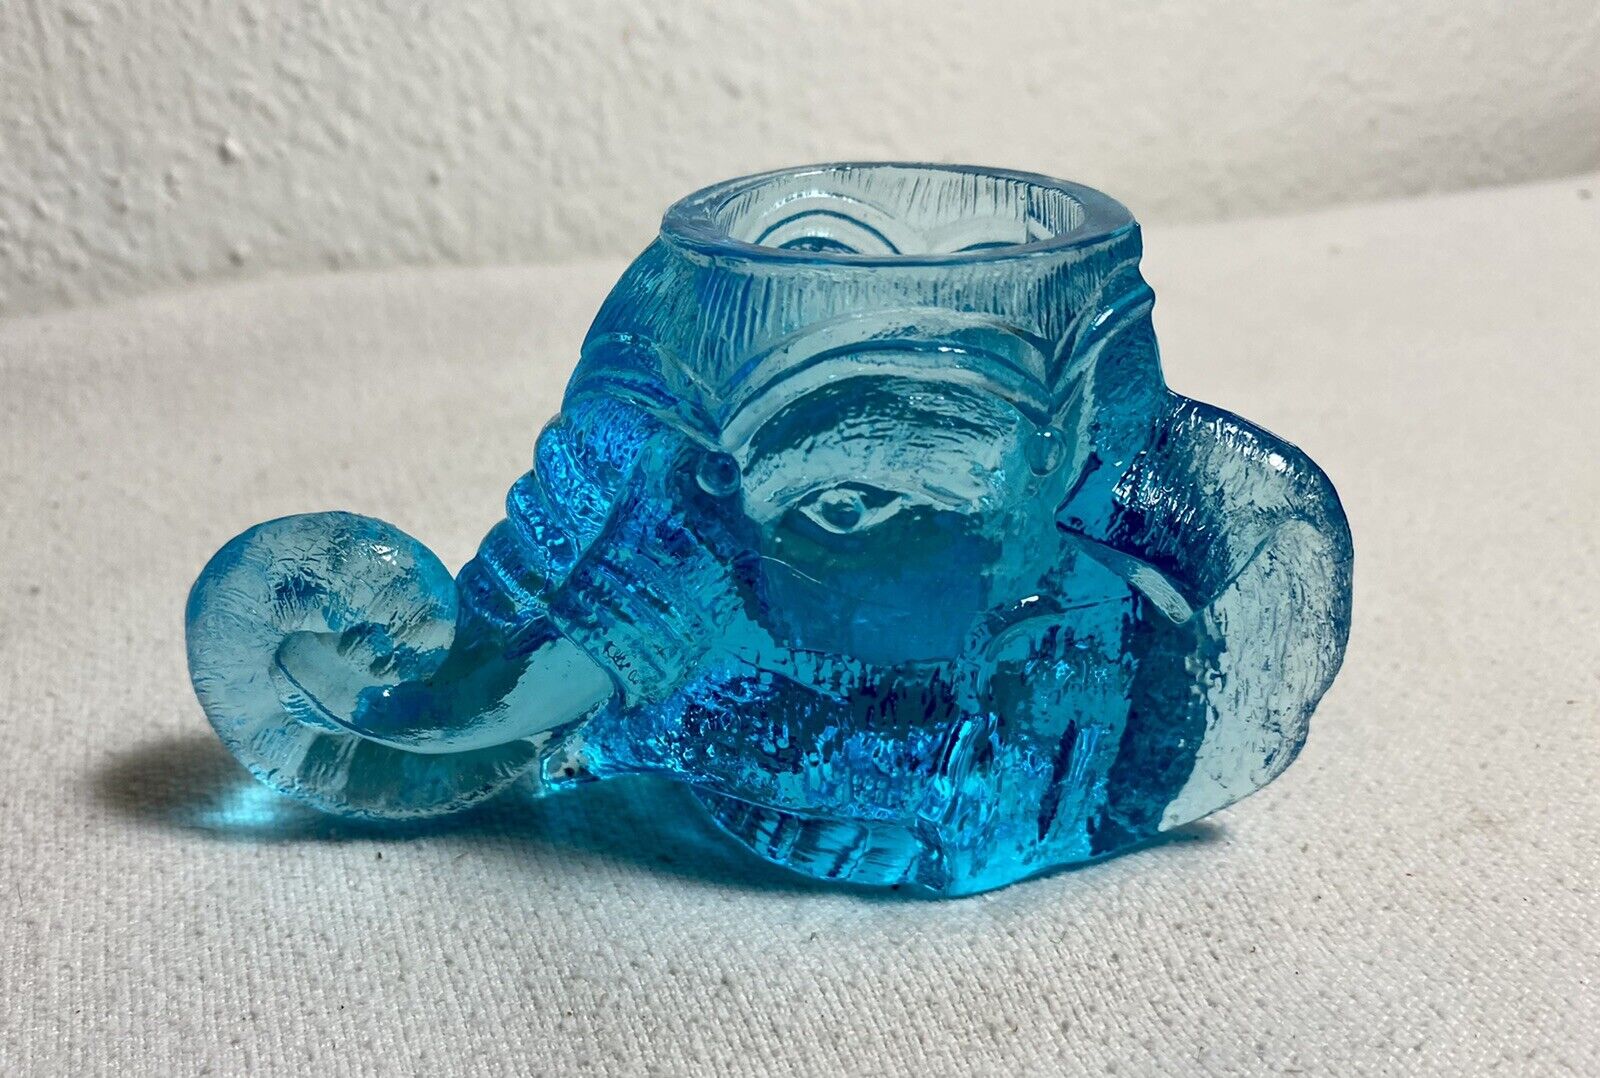 Boyd Glass Vibrant Blue Elephant Head with Tusks Toothpick Match Holder